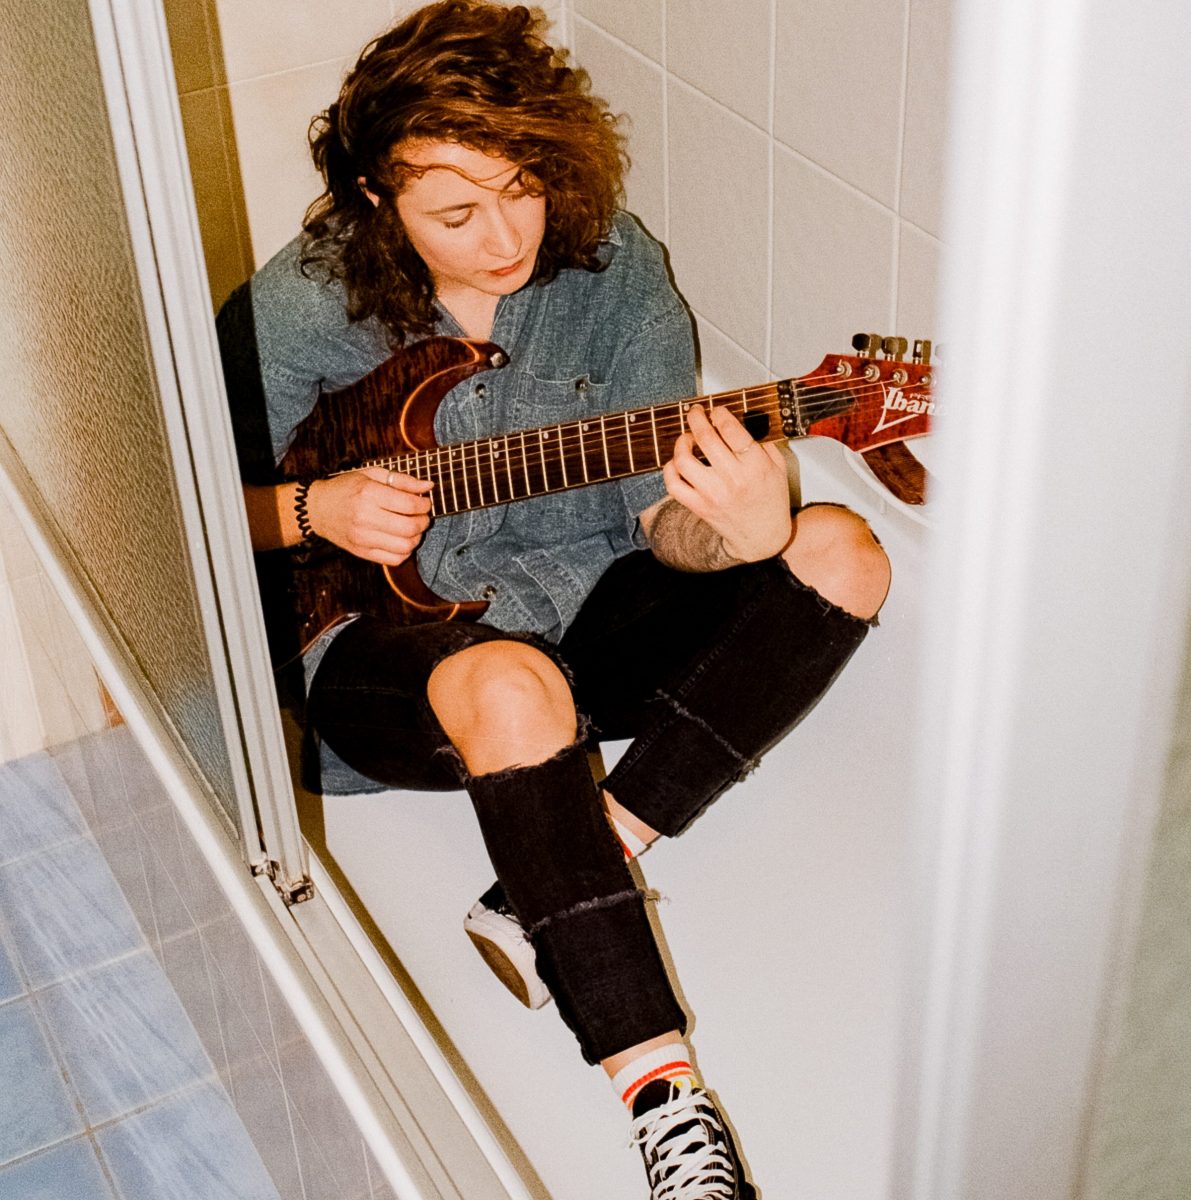 Woman sitting in the bath with her guitar